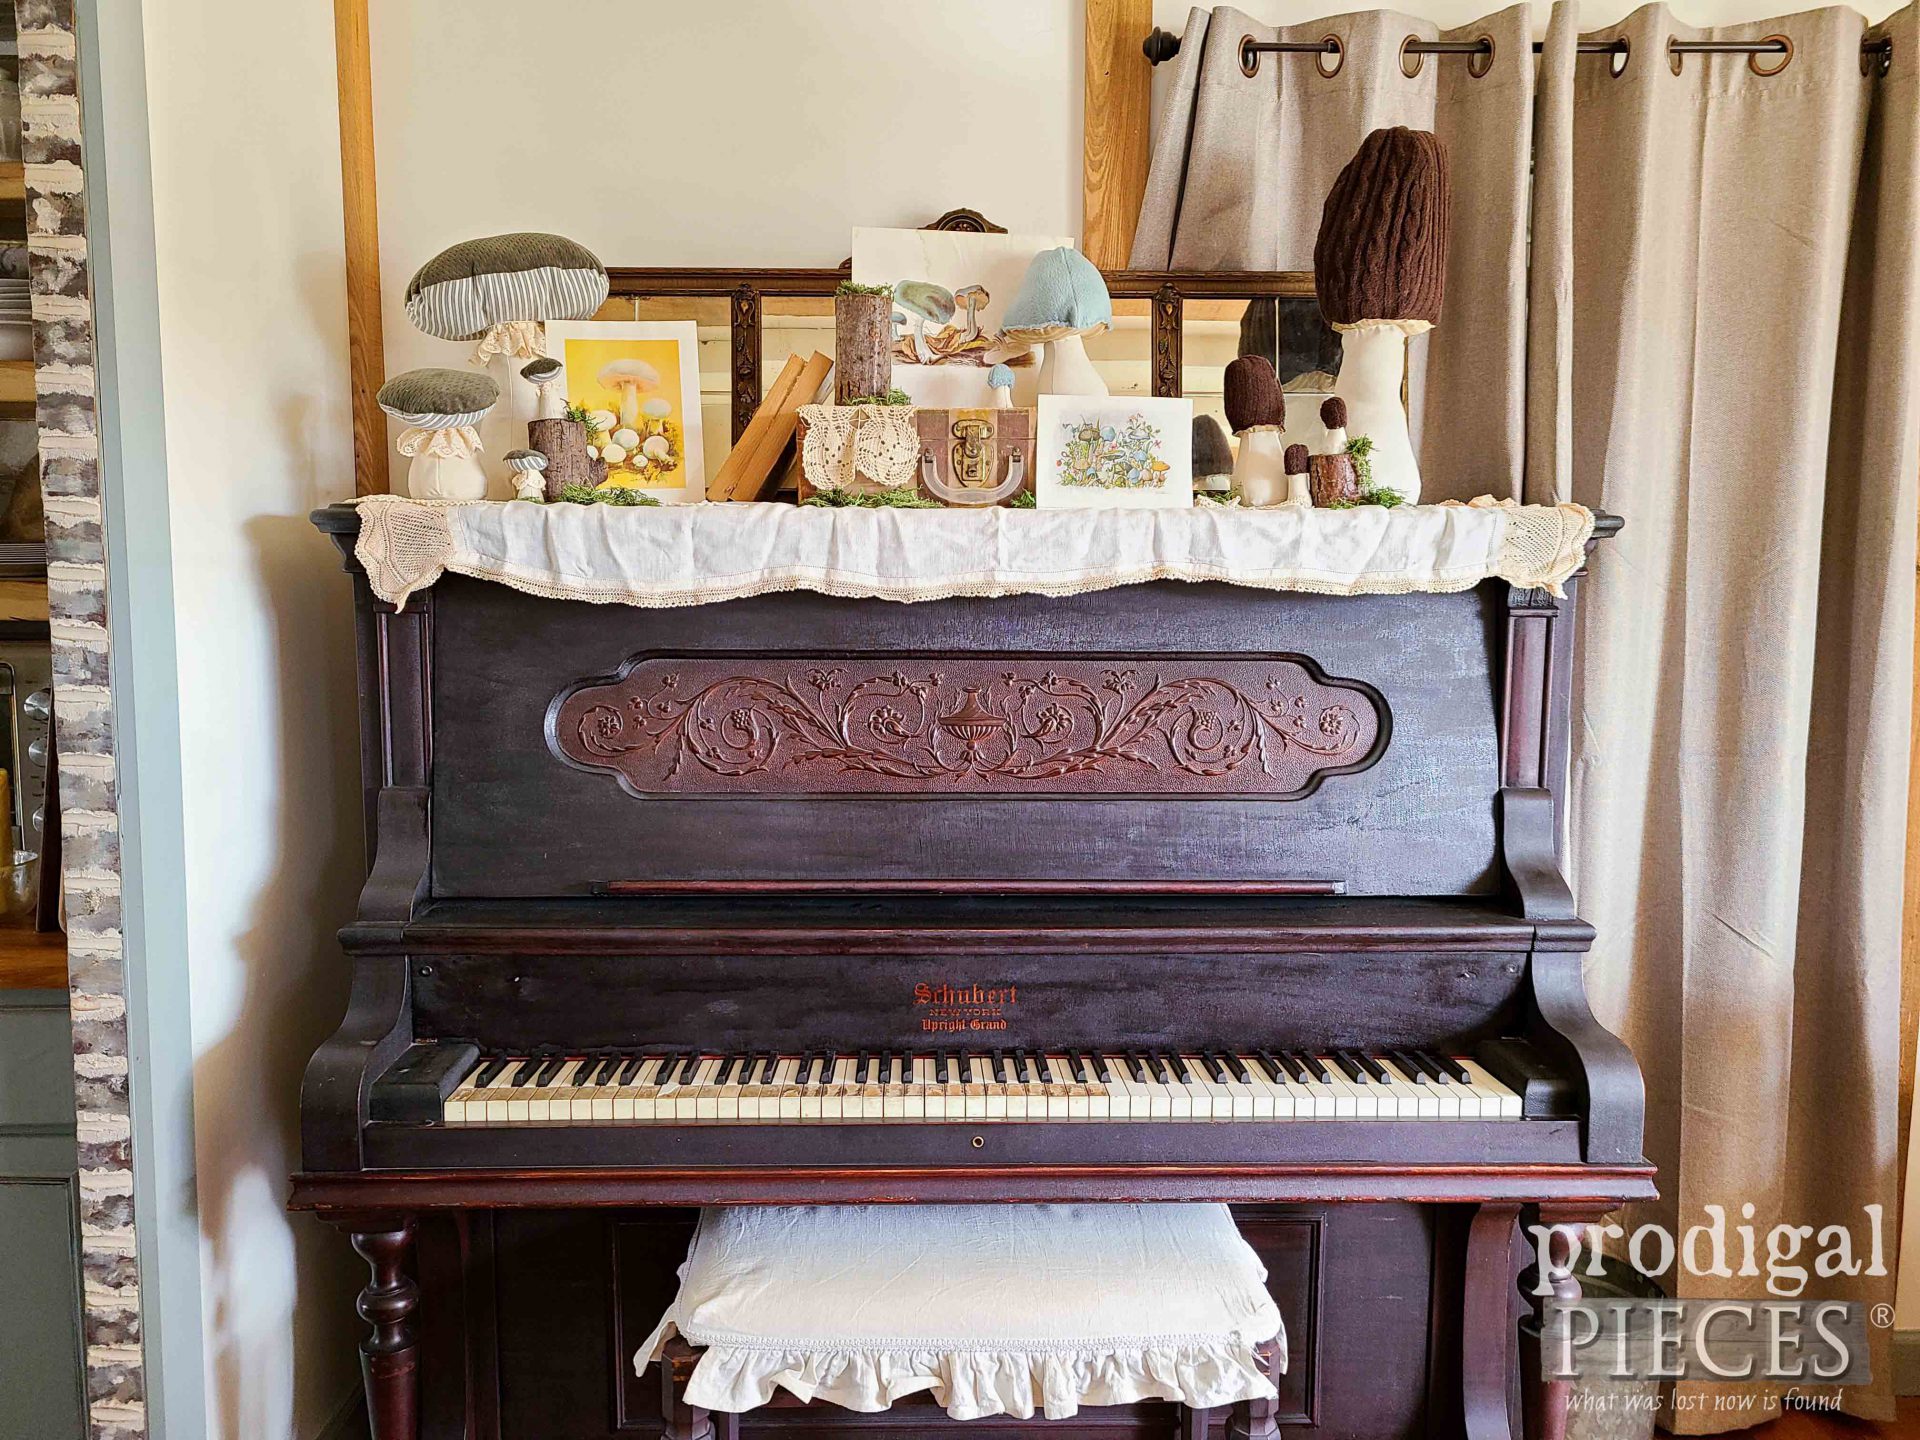 Antique Piano with Spring Vignette Created by Larissa of Prodigal Pieces | prodigalpieces.com #prodigalpieces #handmade #farmhouse #crafts #sewing